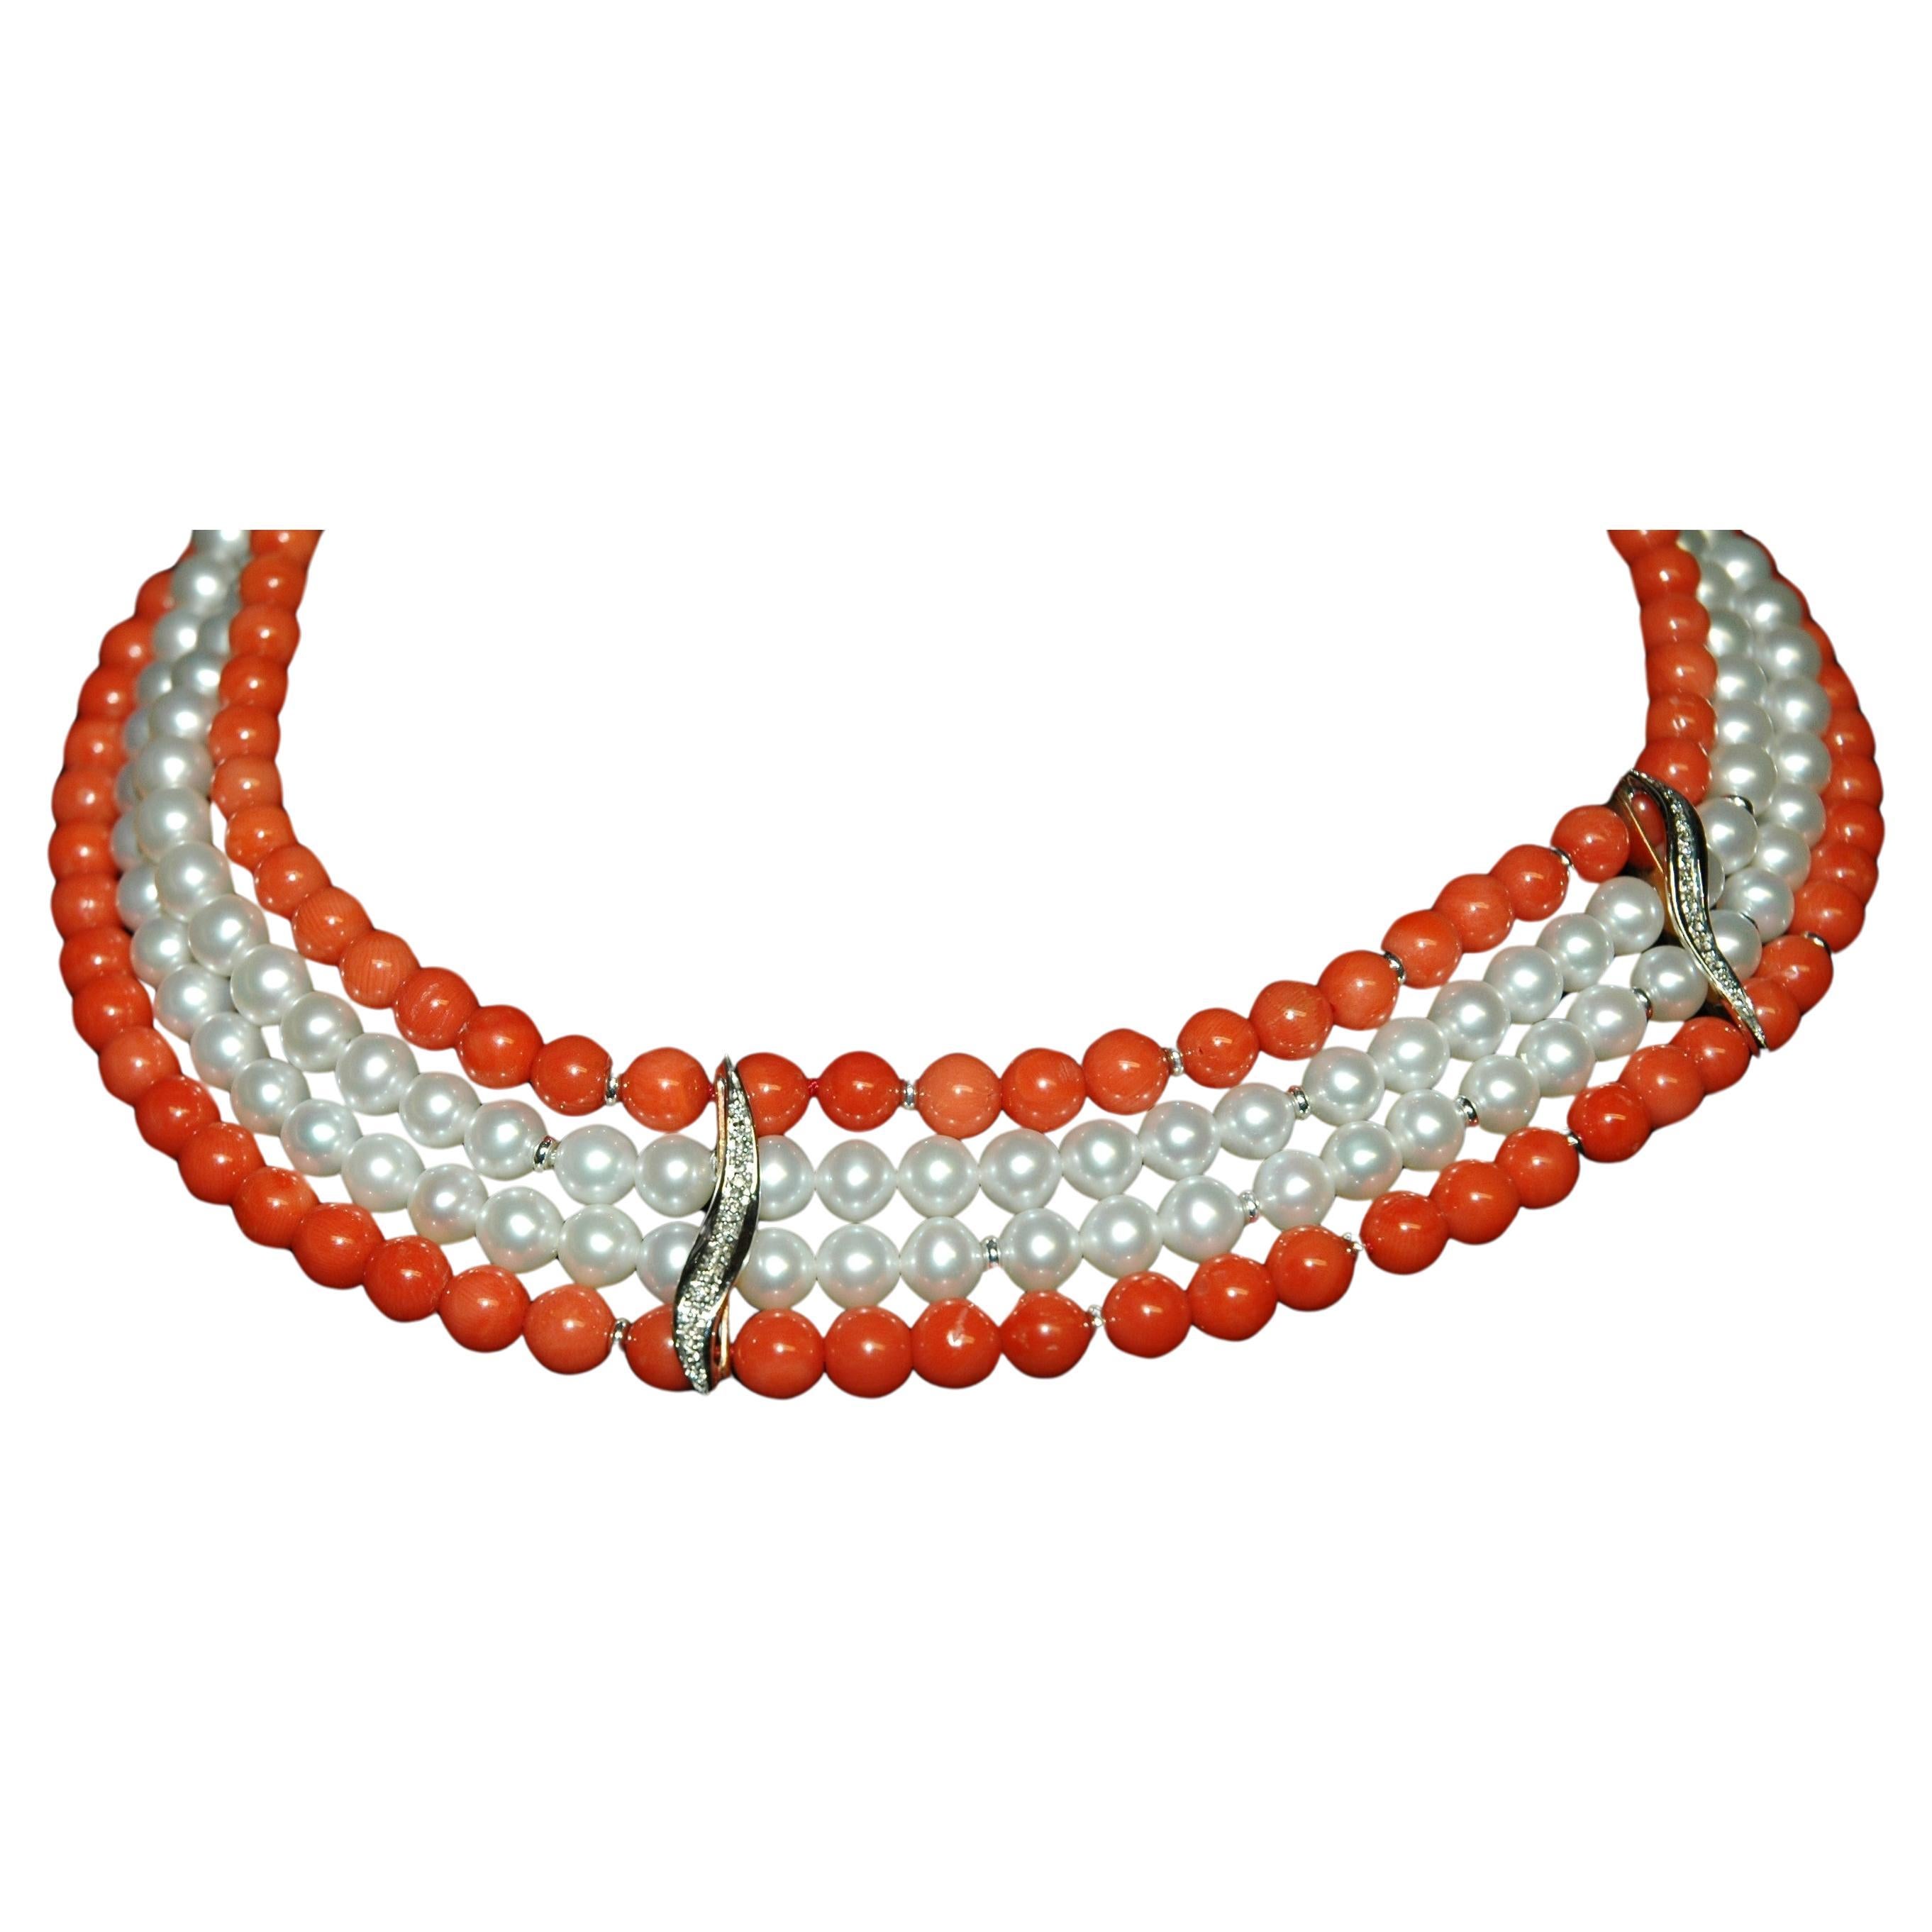 Collier de chien made of yellow gold, white gold and diamonds with four alternating strands of Japanese pearls and natural Mediterranean corals. It is a unique piece that can be worn at different lengths, thanks to the clasp made of many gold rings